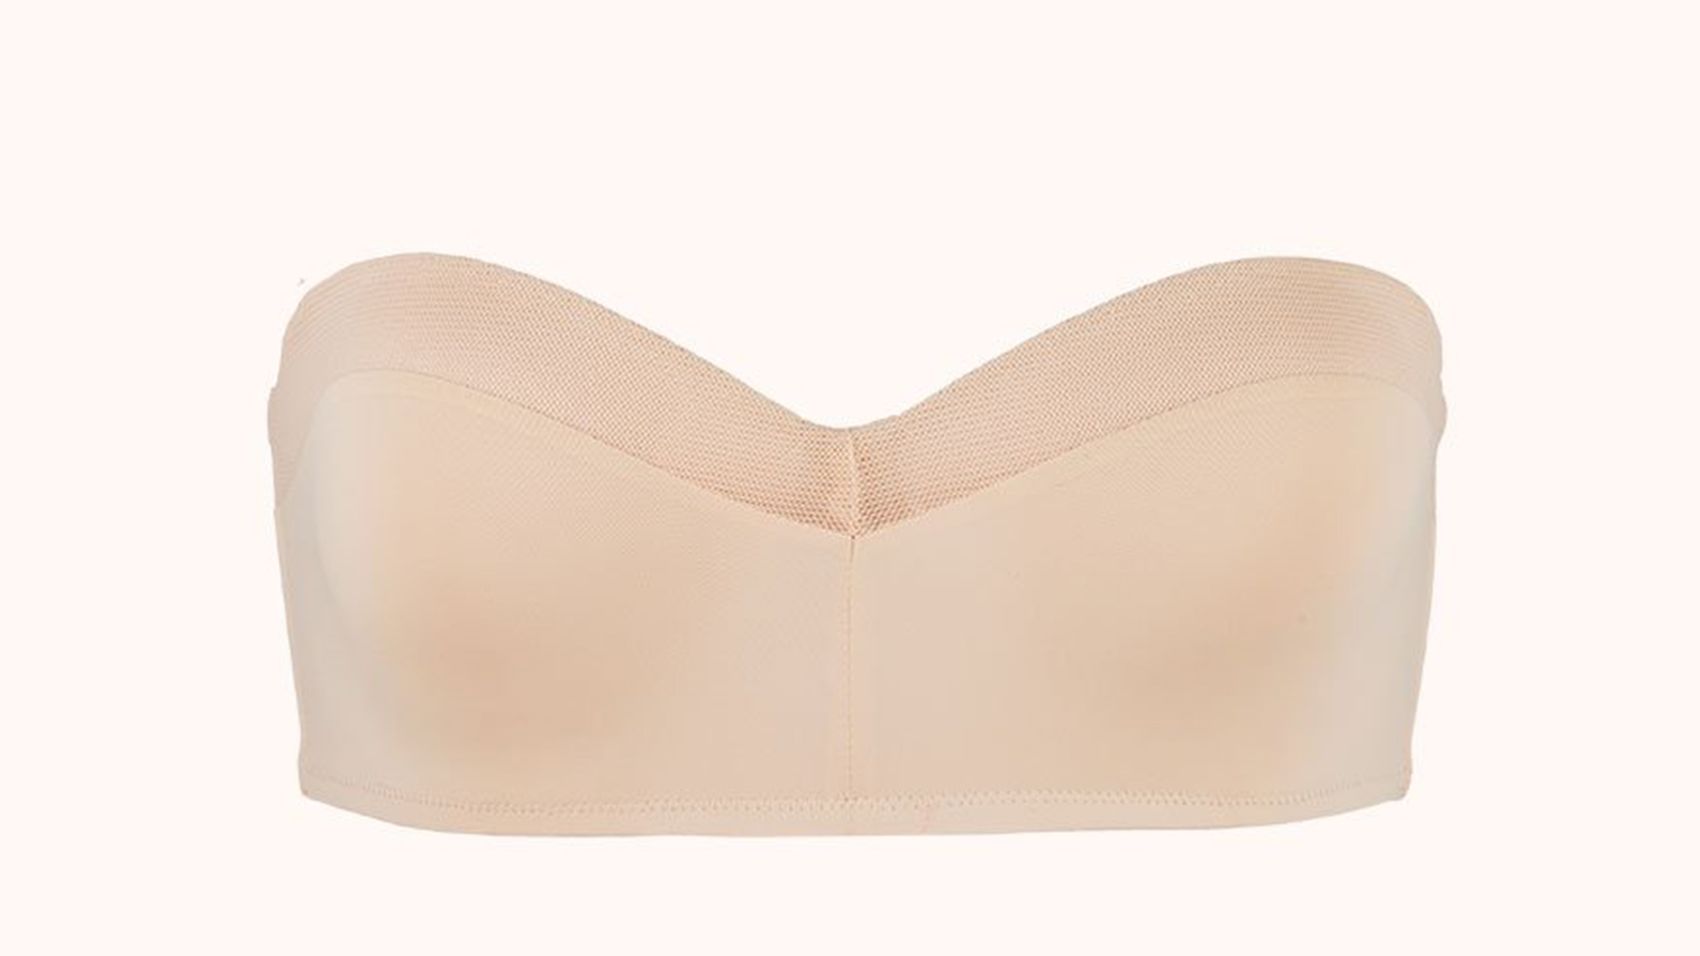 Women's Lively Bras from $35